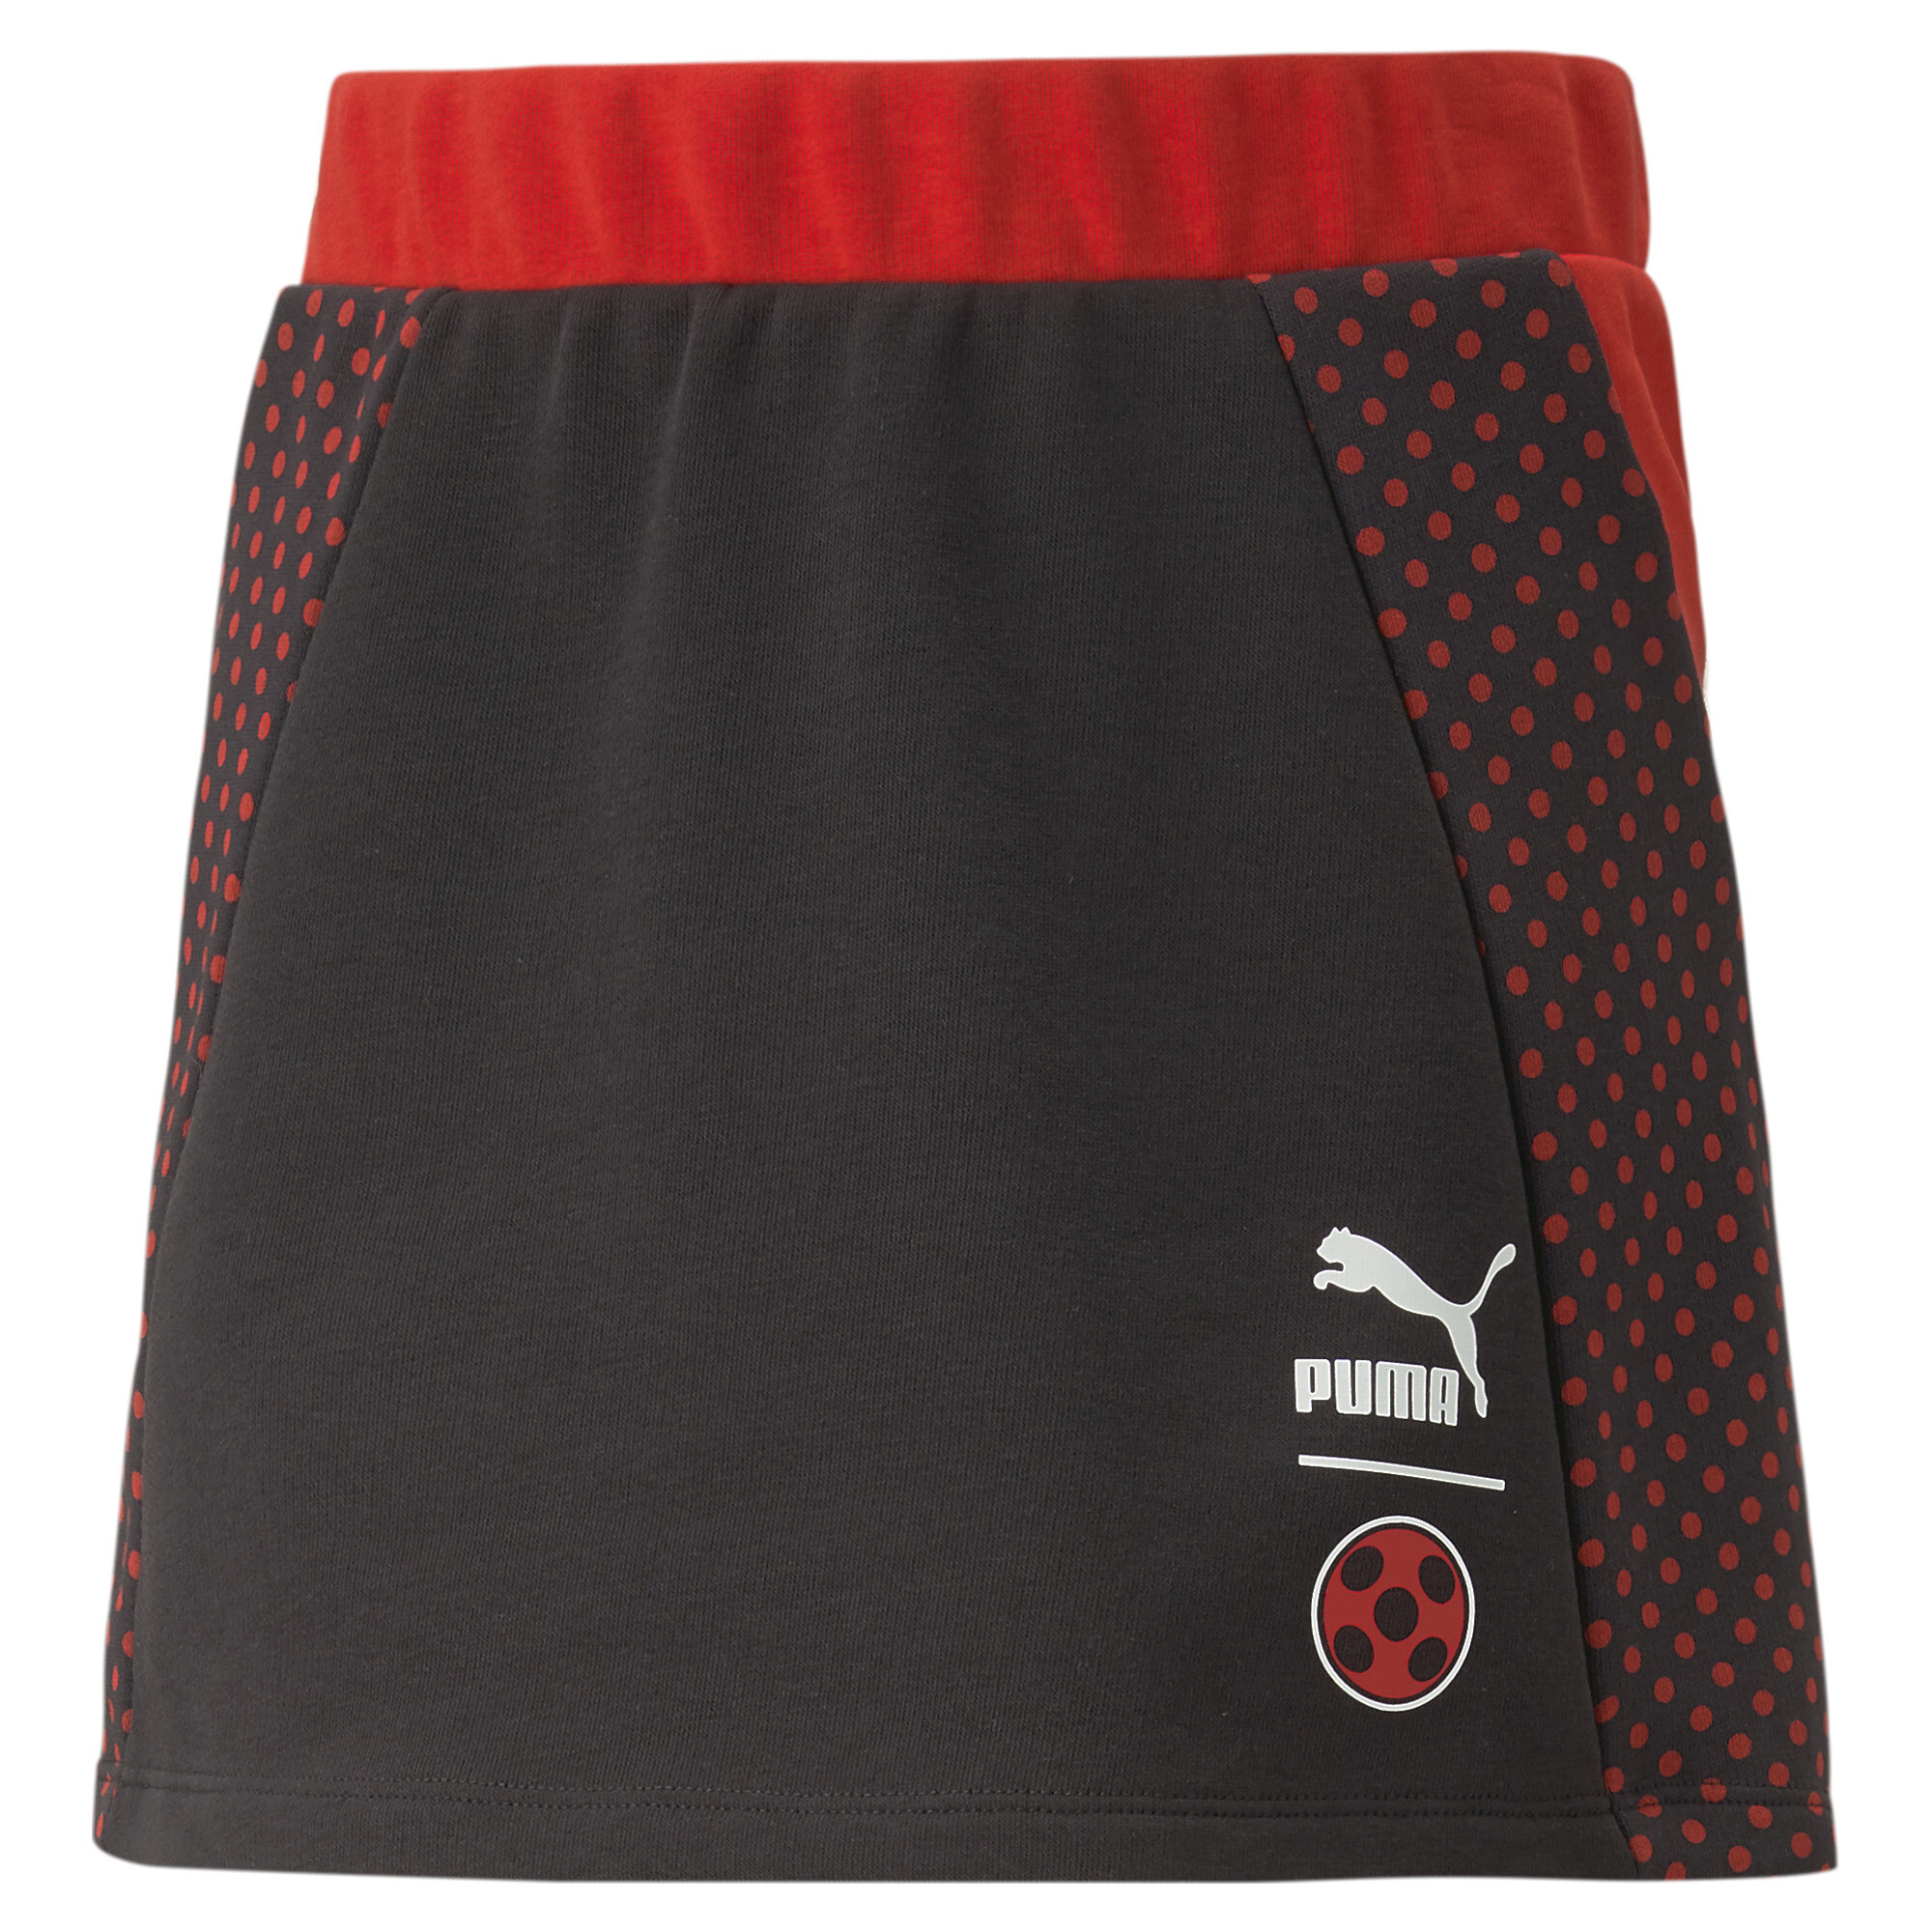 PUMA X MIRACULOUS Skirt In Black, Size 7-8 Youth